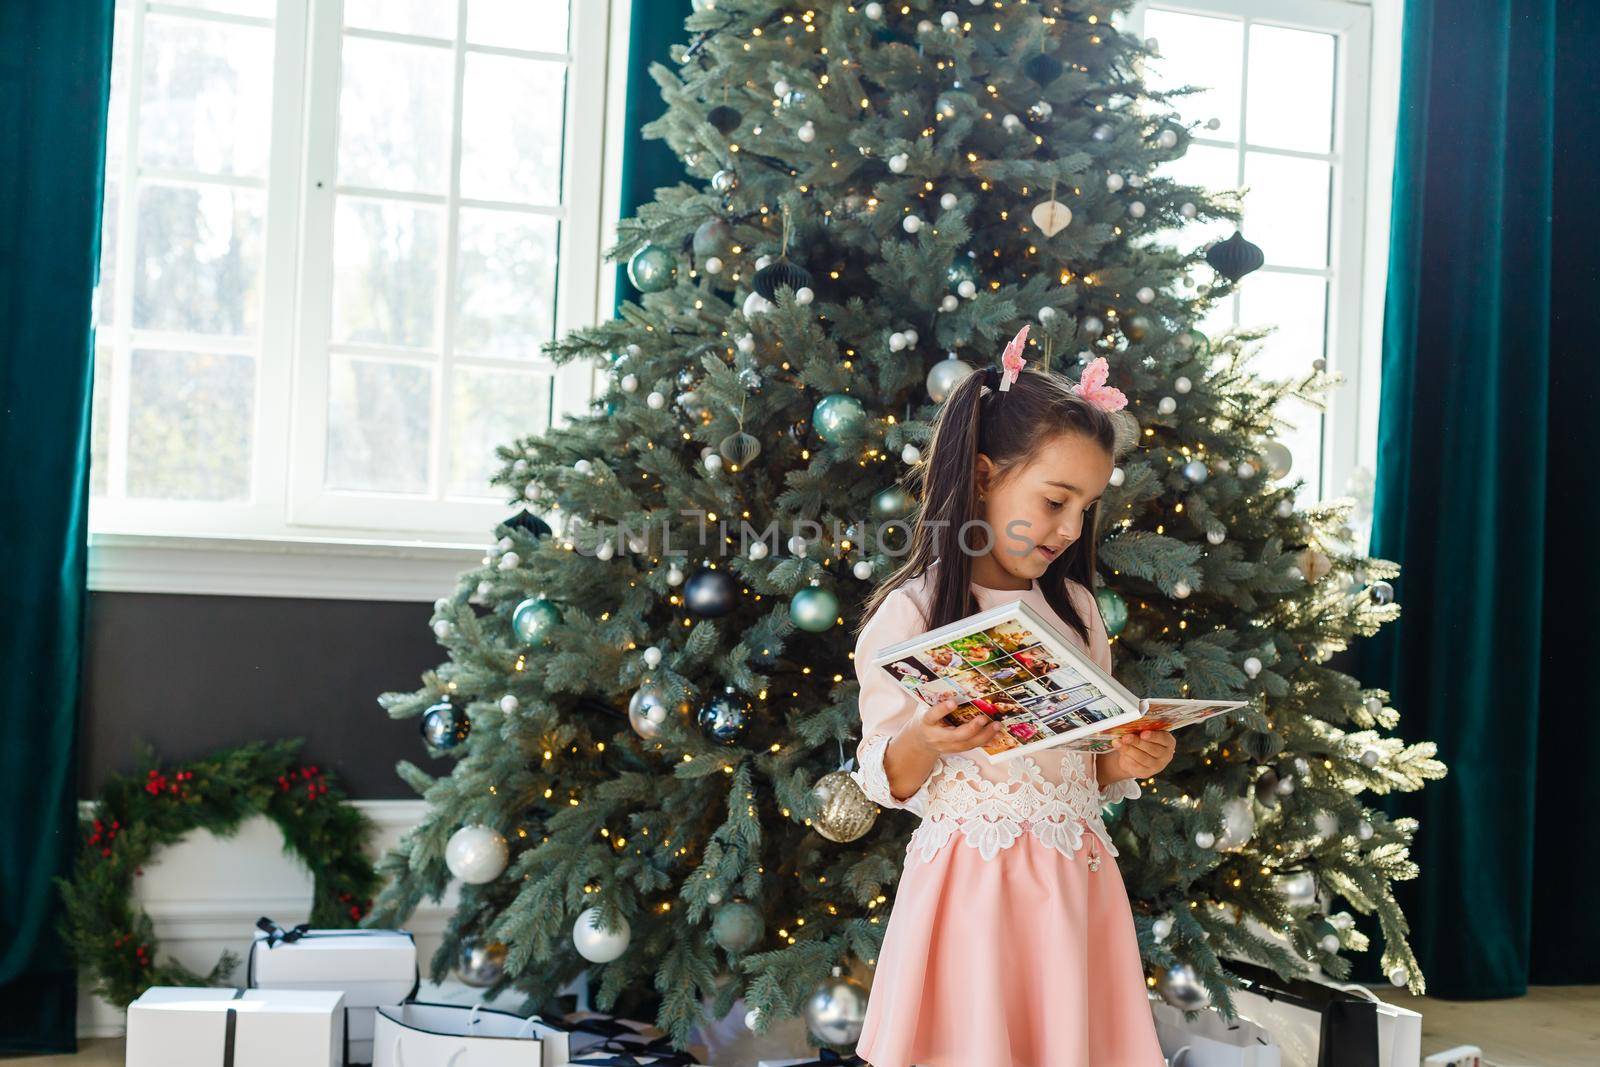 little girl looking photobook in front of Christmas tree by Andelov13